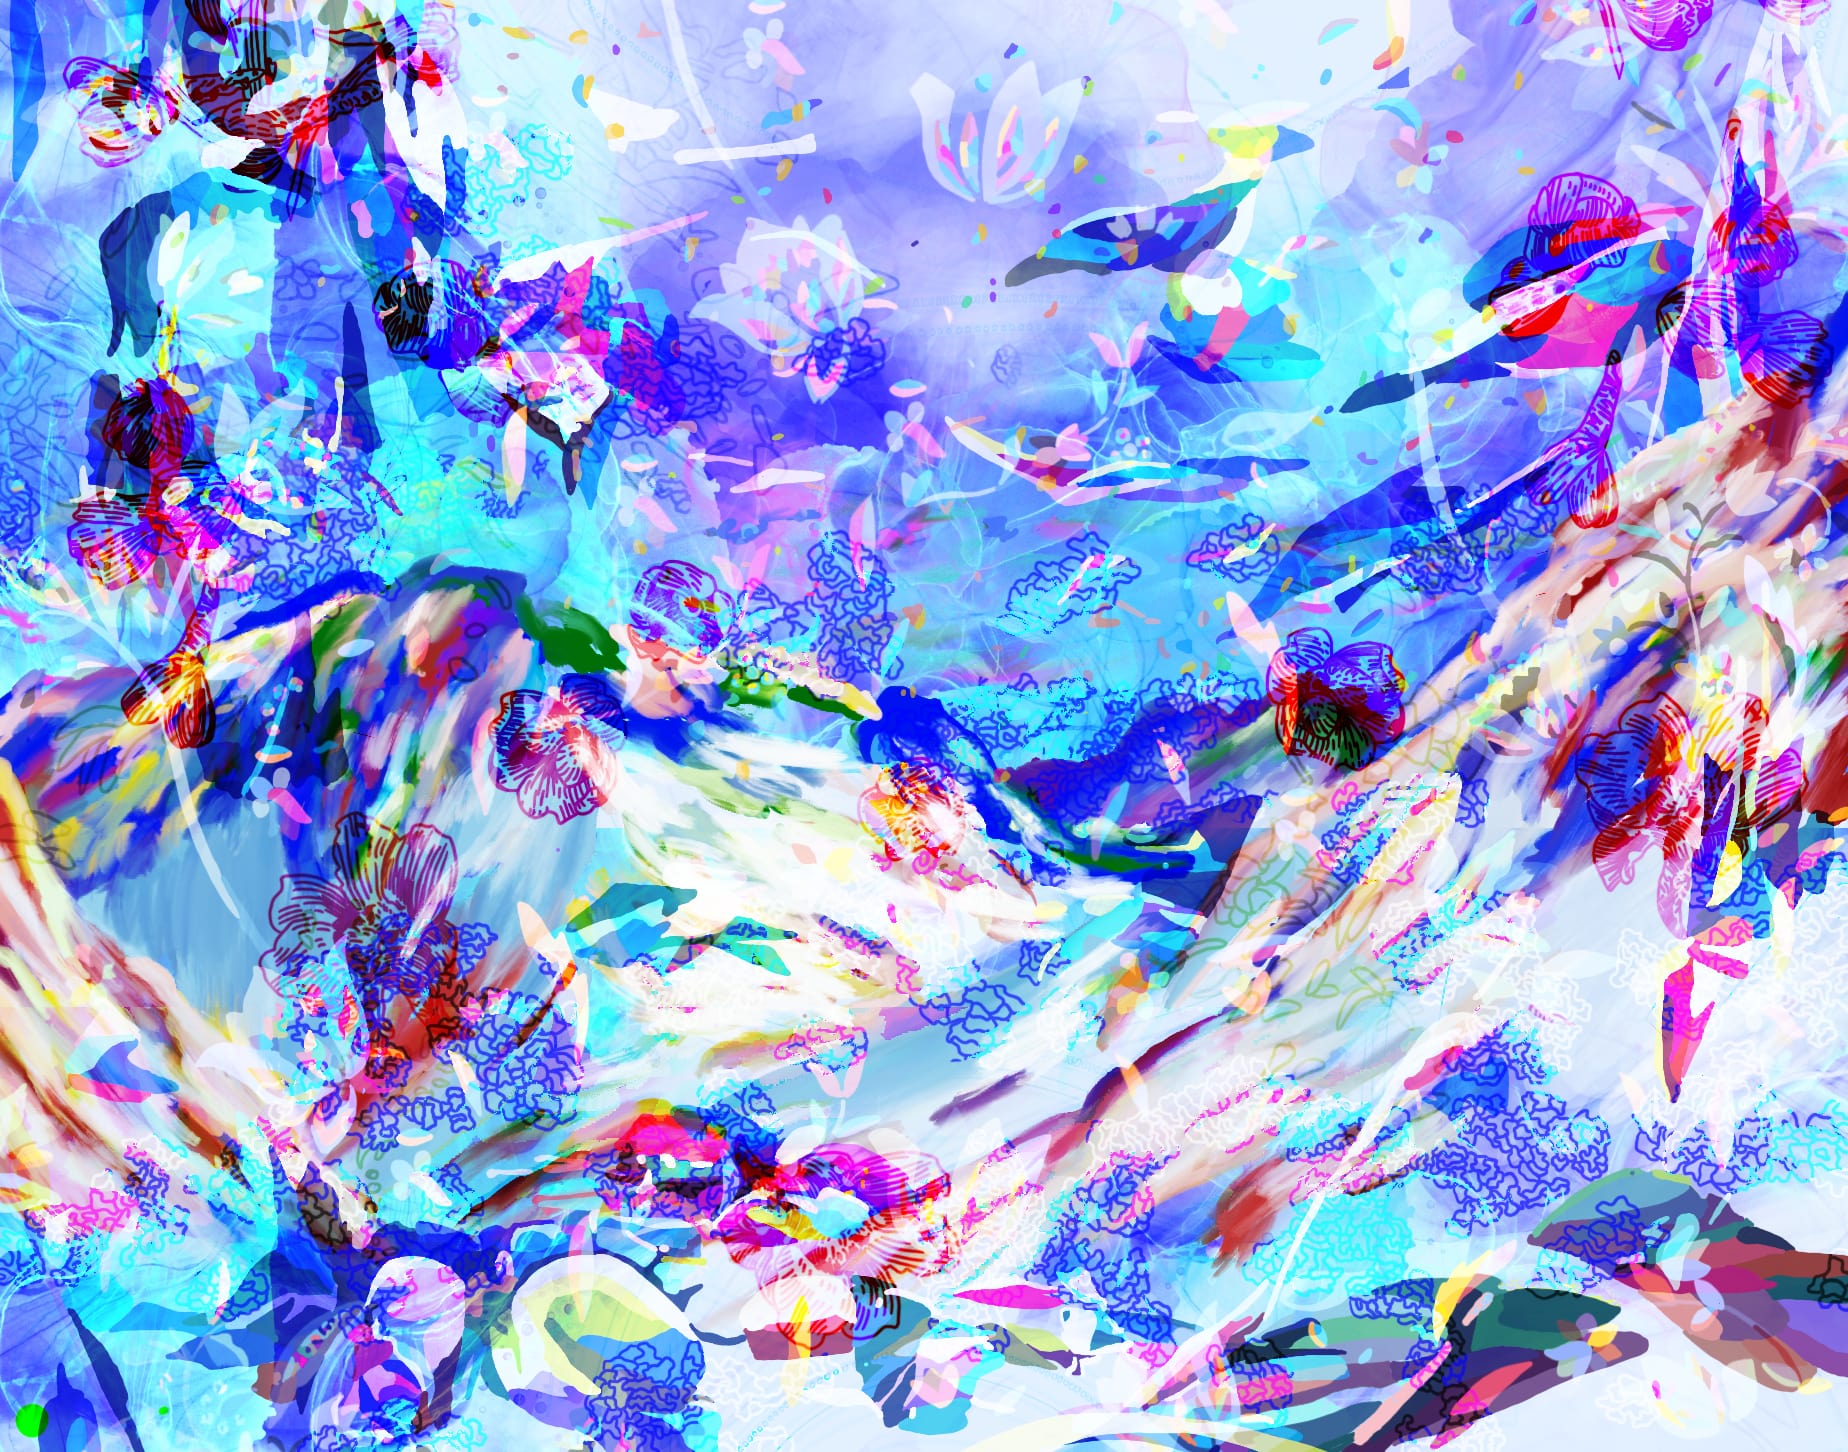 Digital drawing collage. White snowy mountains painted with gem-colored highlights. Layered with colored shards of light and line drawings of flowers on top.